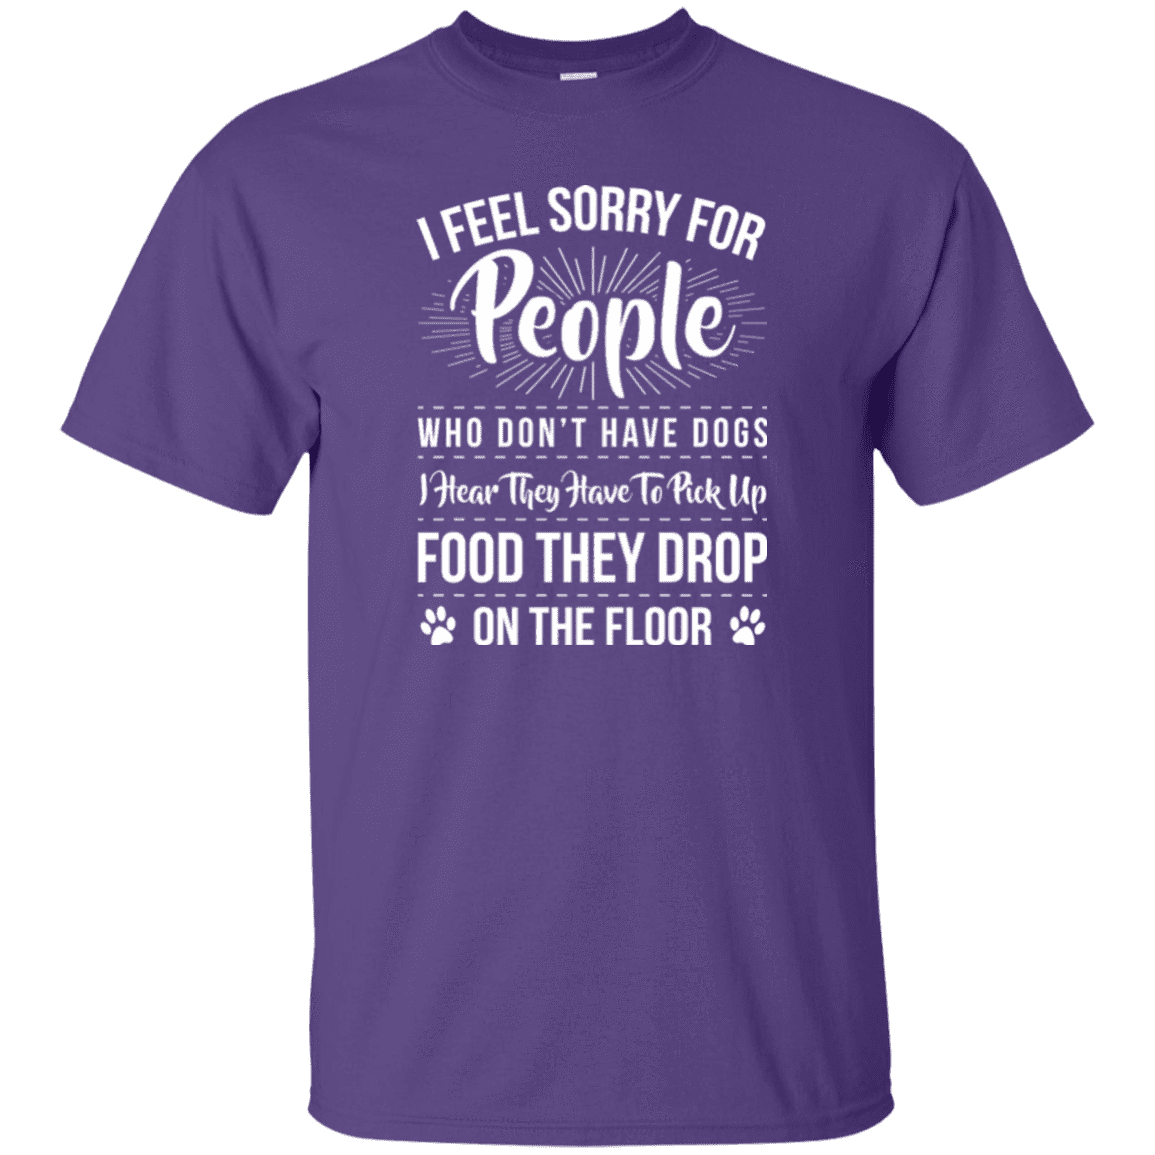 I Feel Sorry For People - T Shirt.